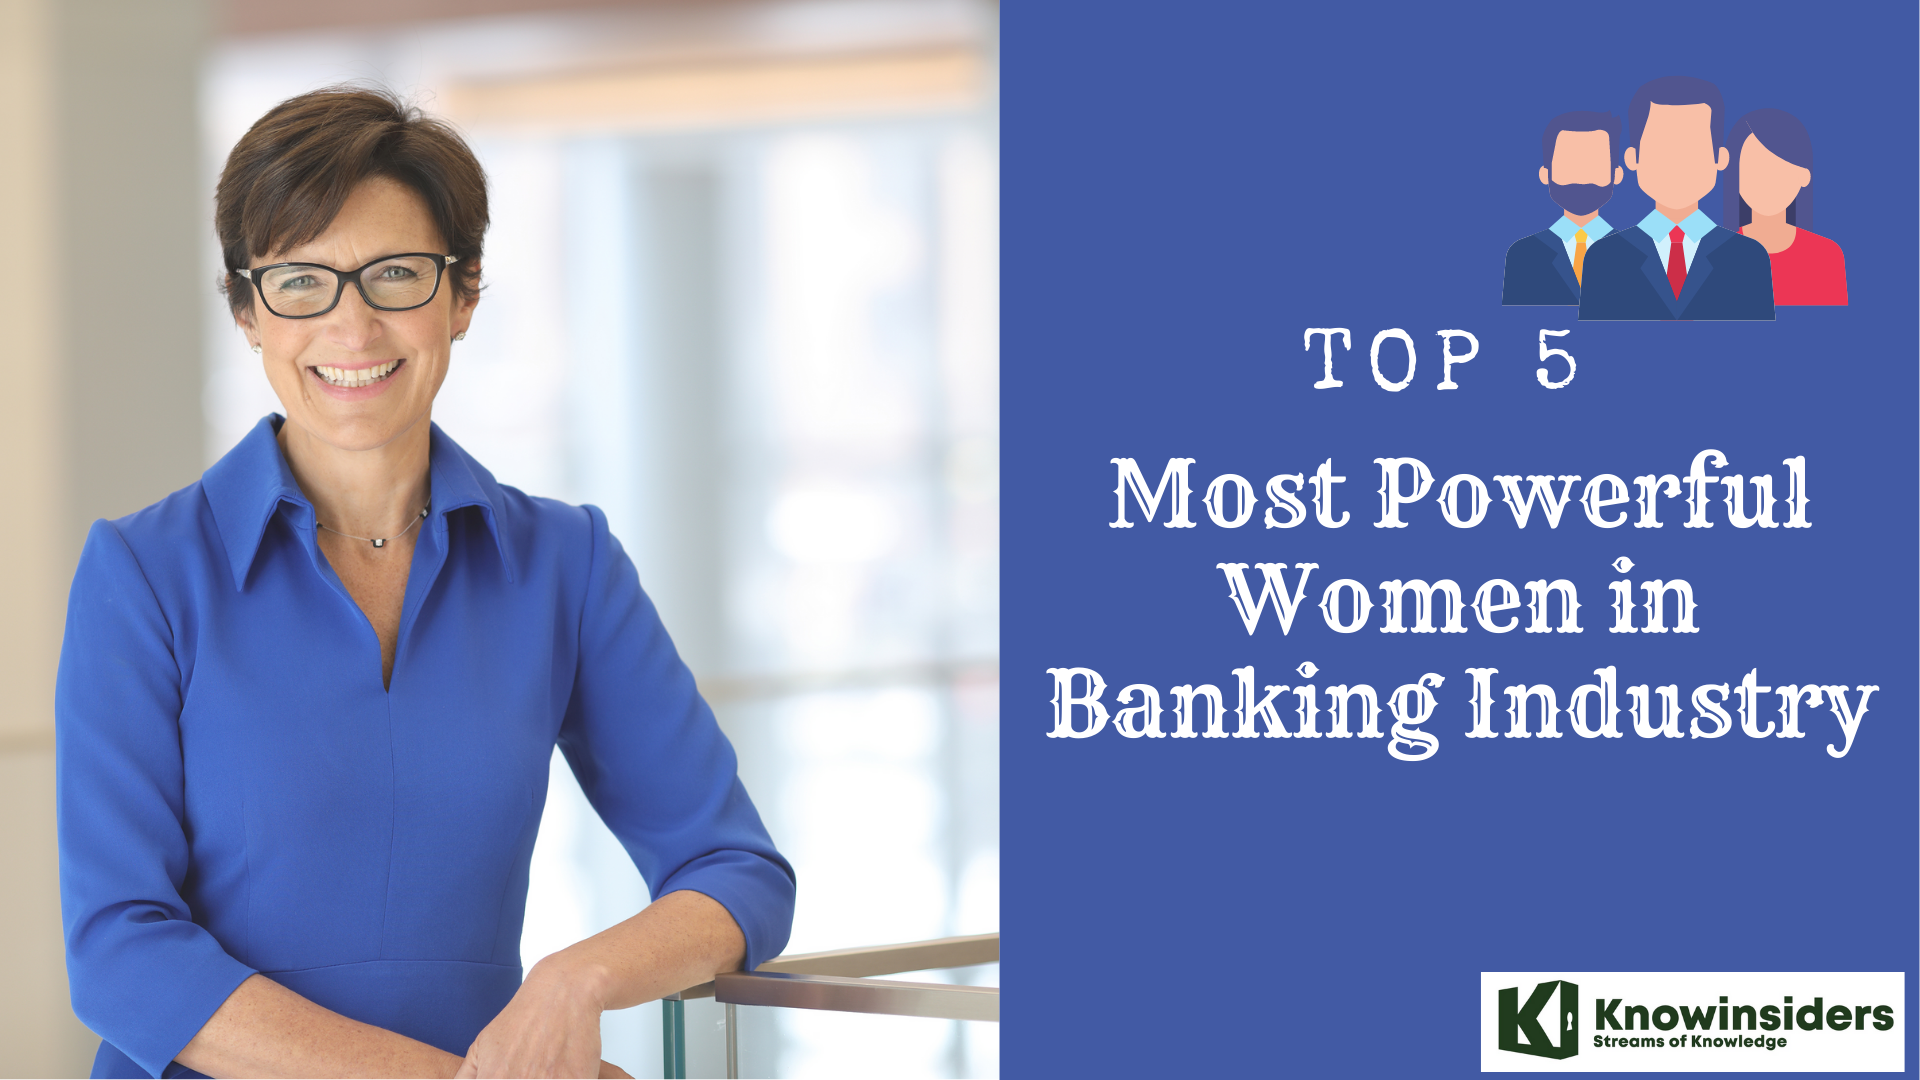 Top 5 Most Powerful Women in Banking